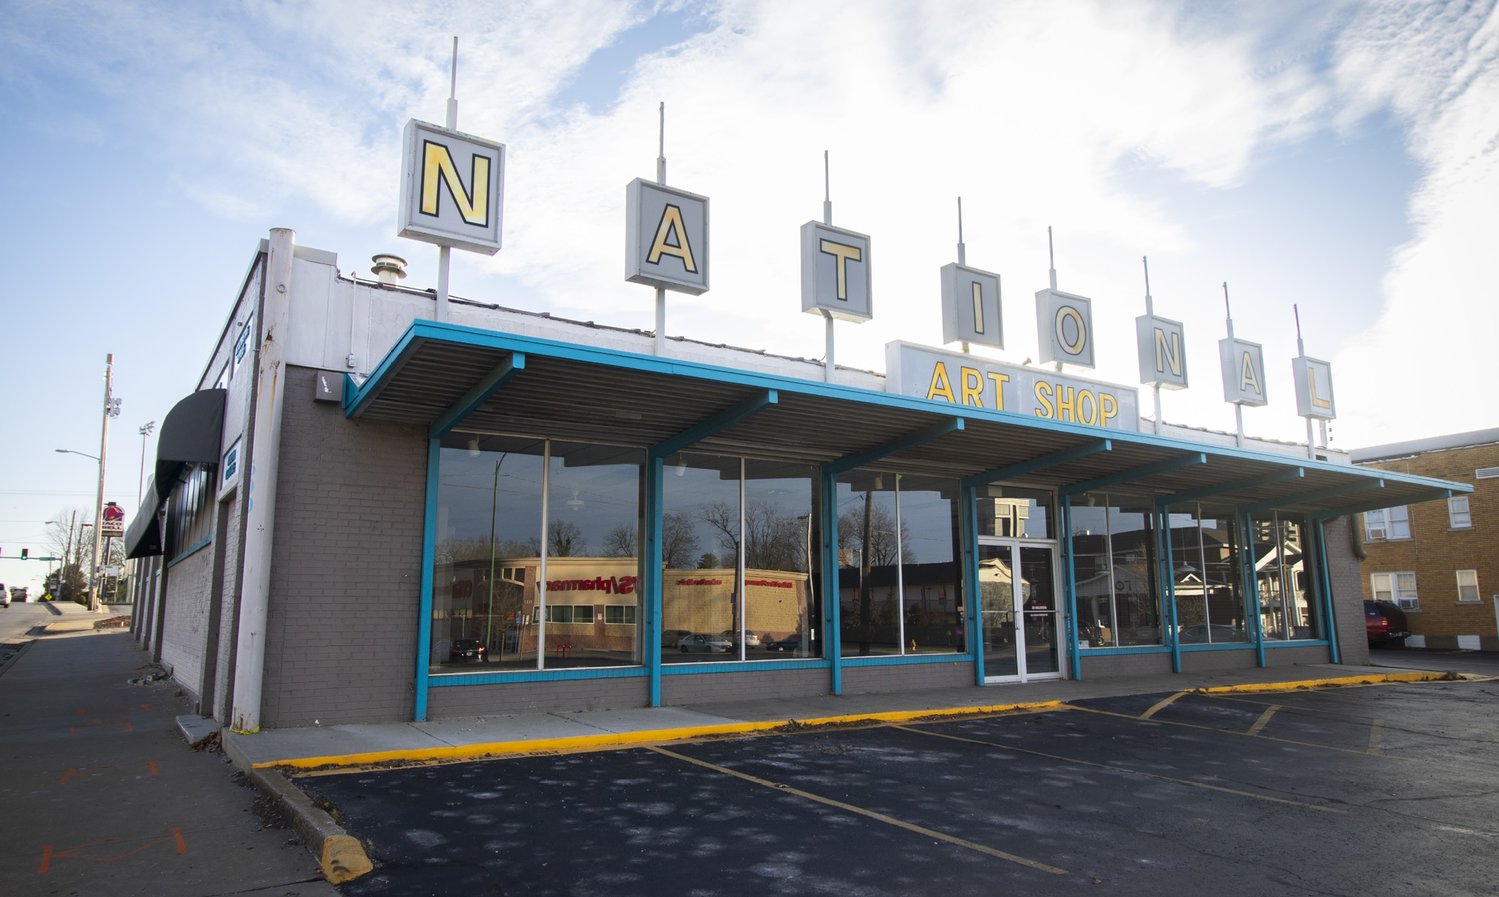 The former National Art Shop is slated to be demolished to make way for a new Andy's Frozen Custard restaurant.